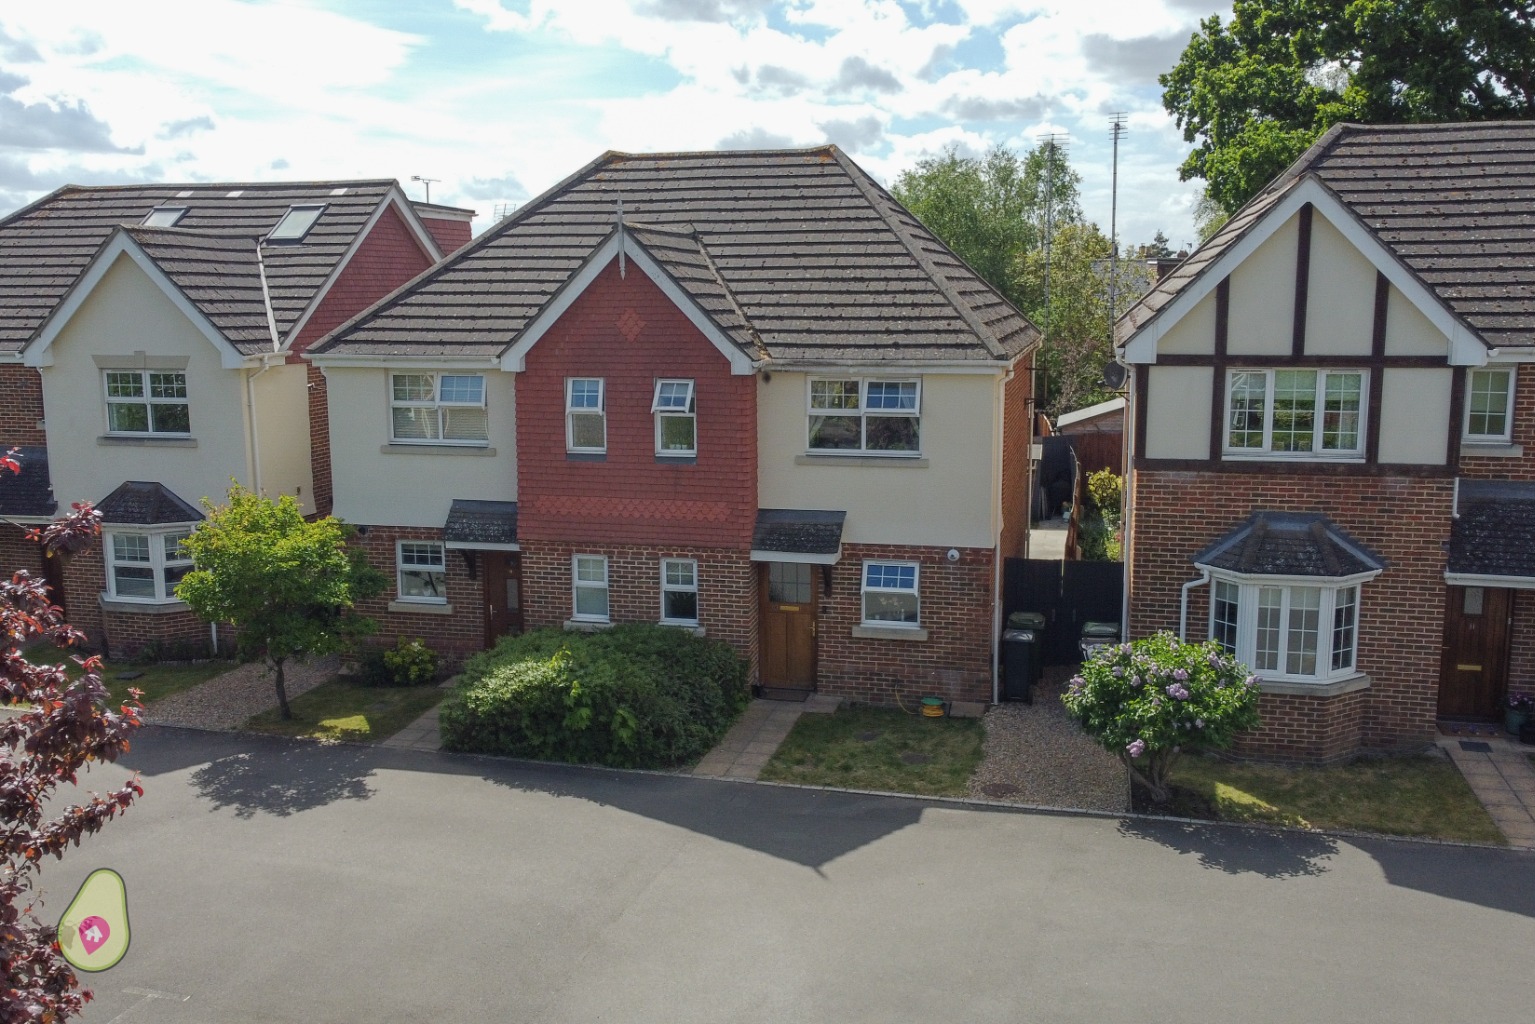 3 bed semi-detached house for sale in Blenheim Place, Camberley, GU15